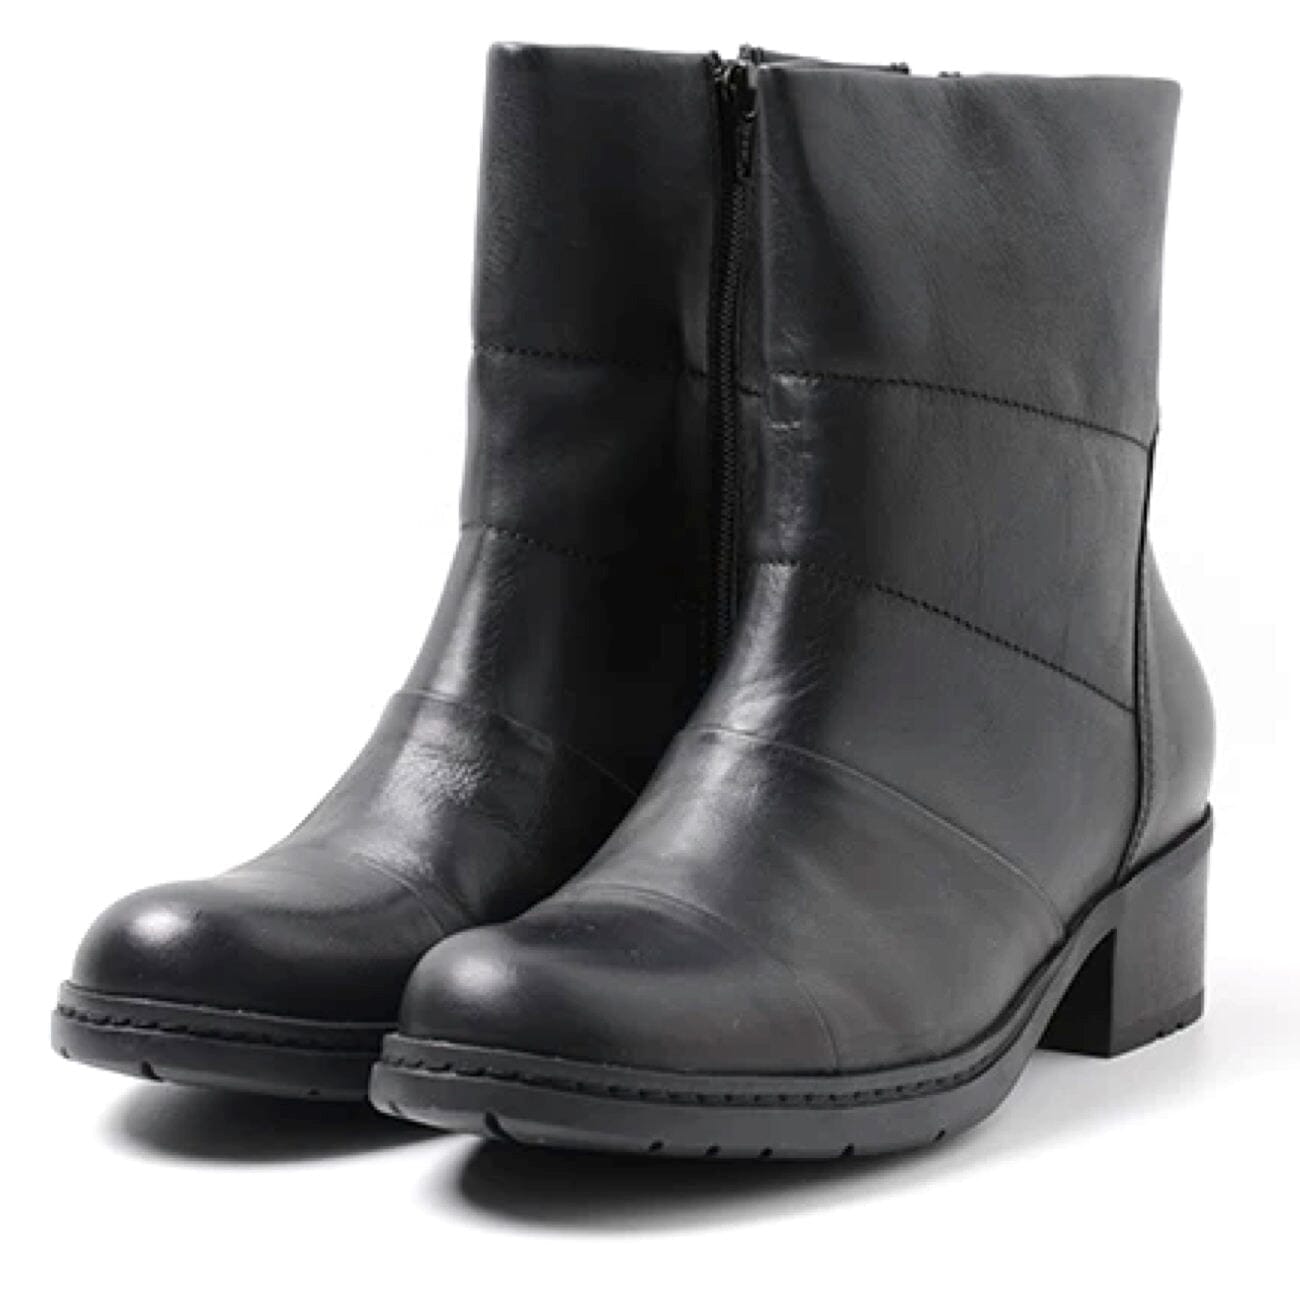 Wolky, Hinton, Boots, Leather, Black Boots Wolky Black 37 